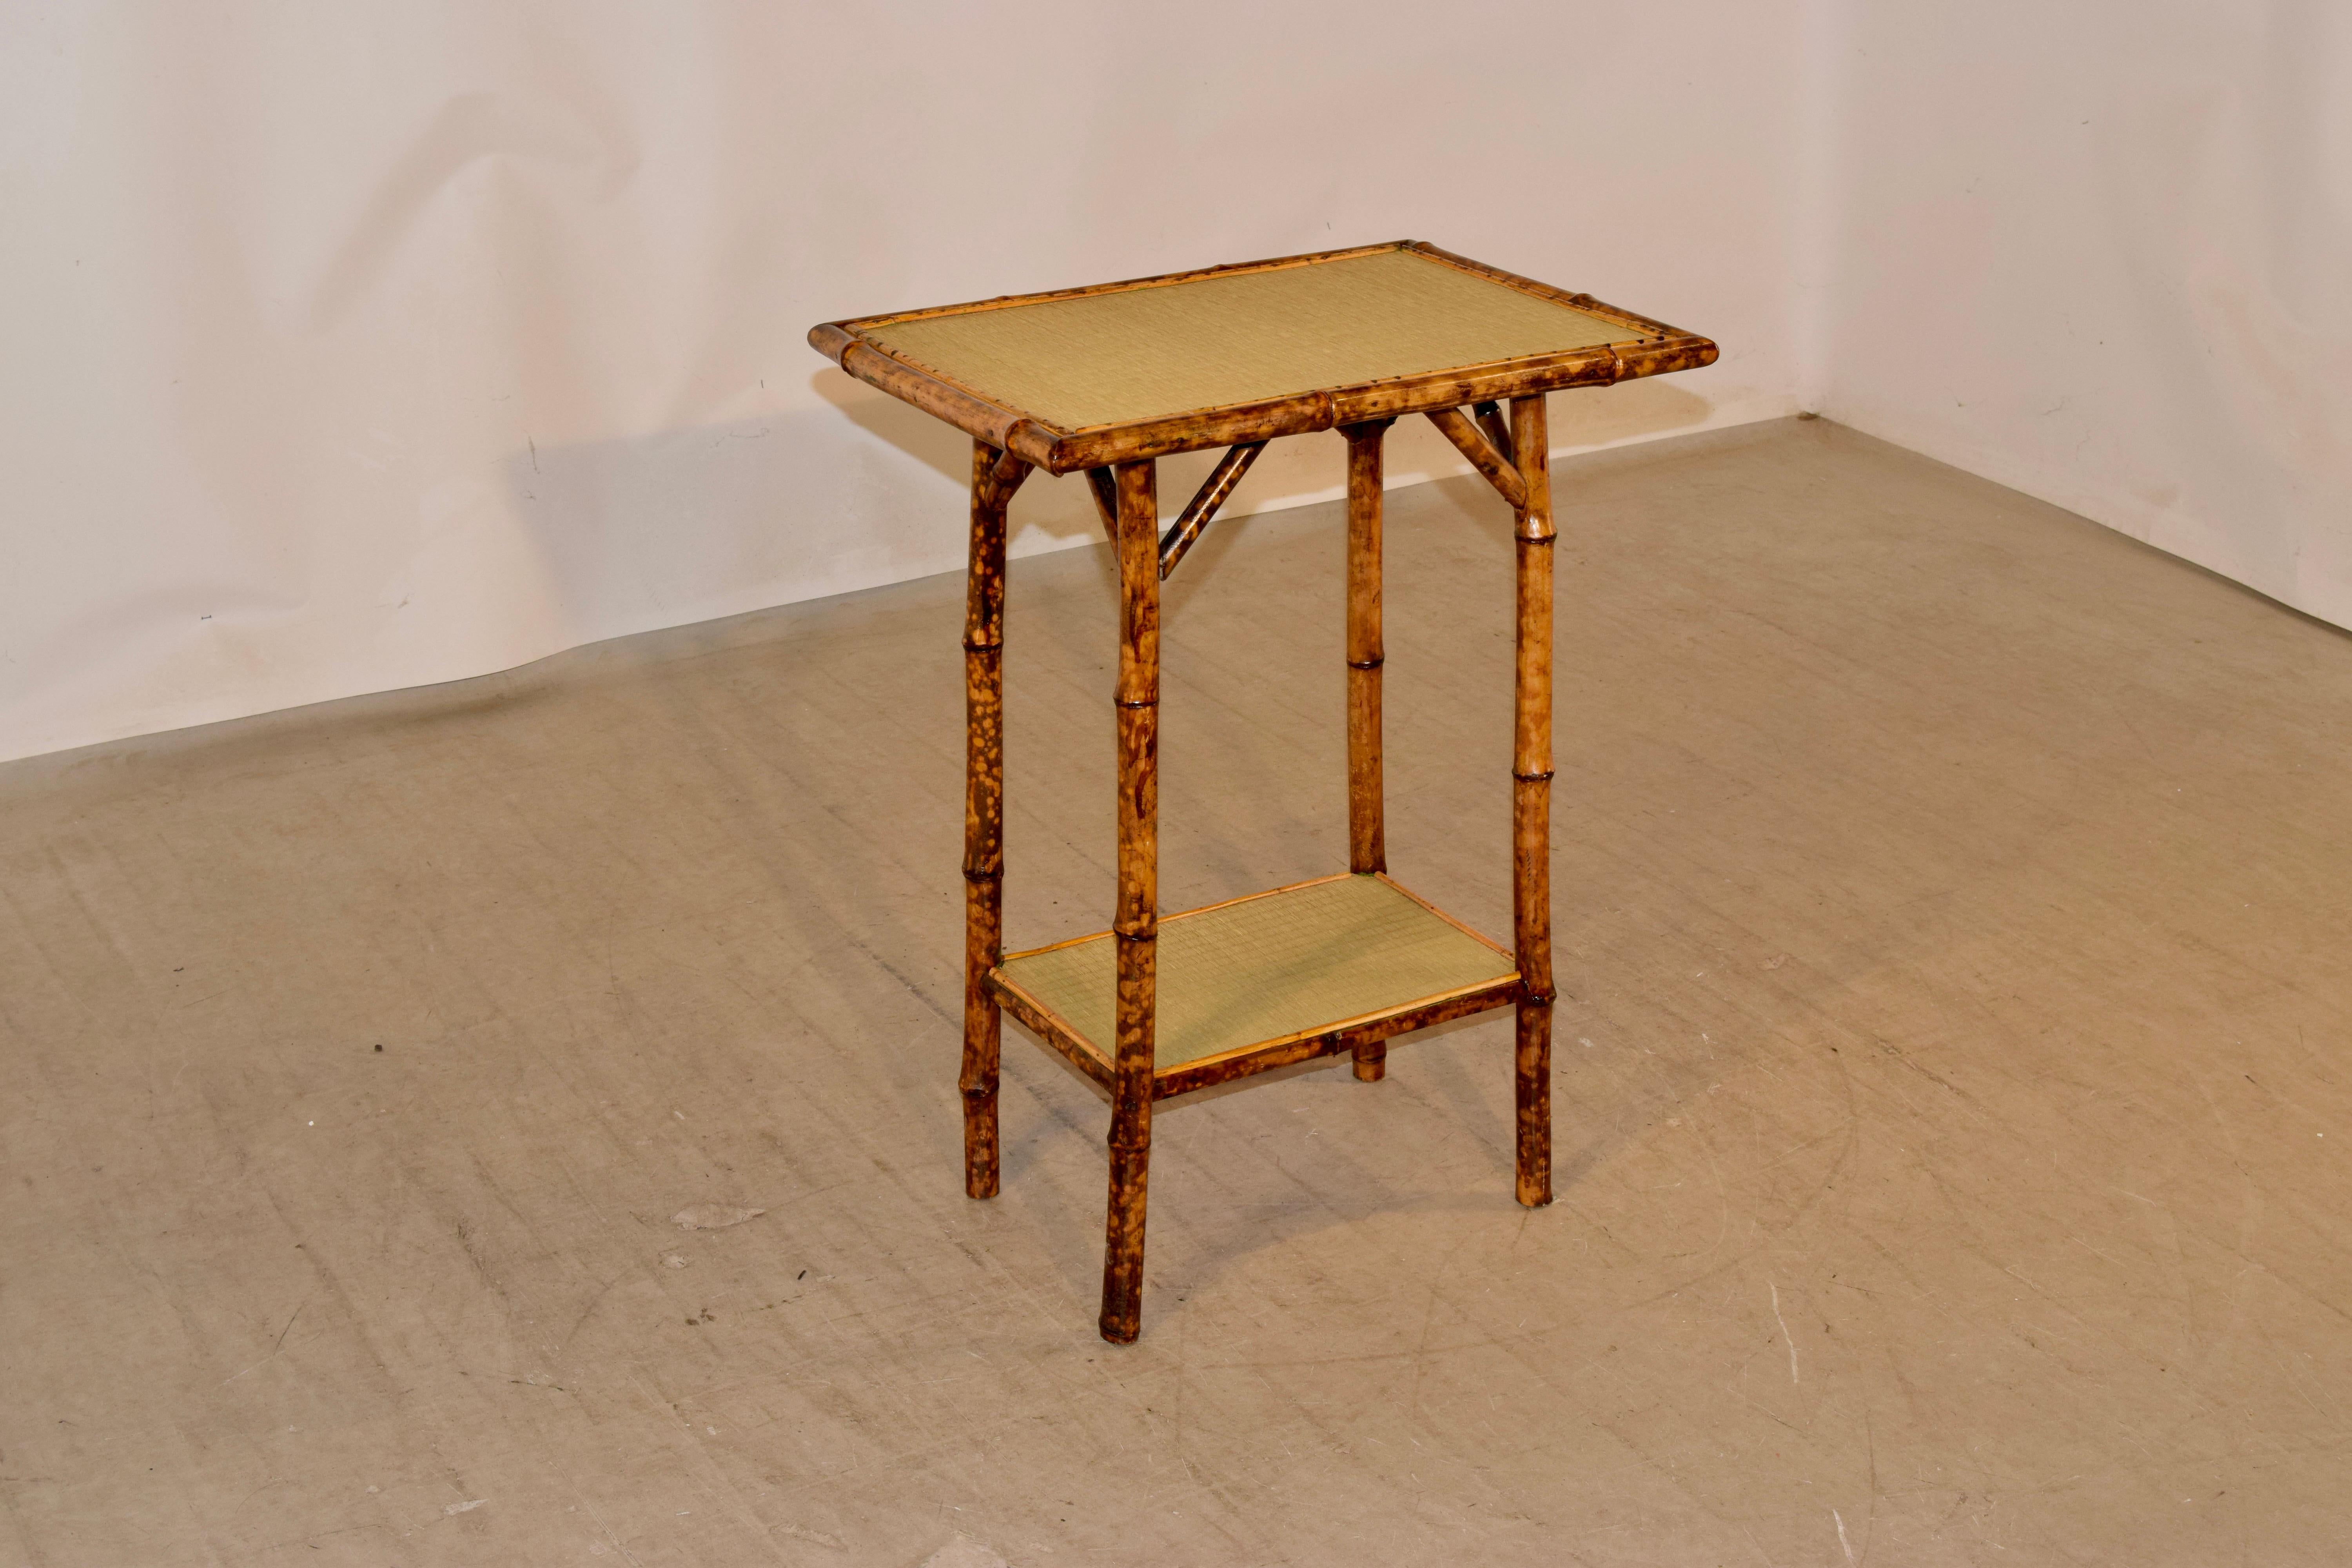 19th century tortoise bamboo side table with rush covered top and lower shelf.